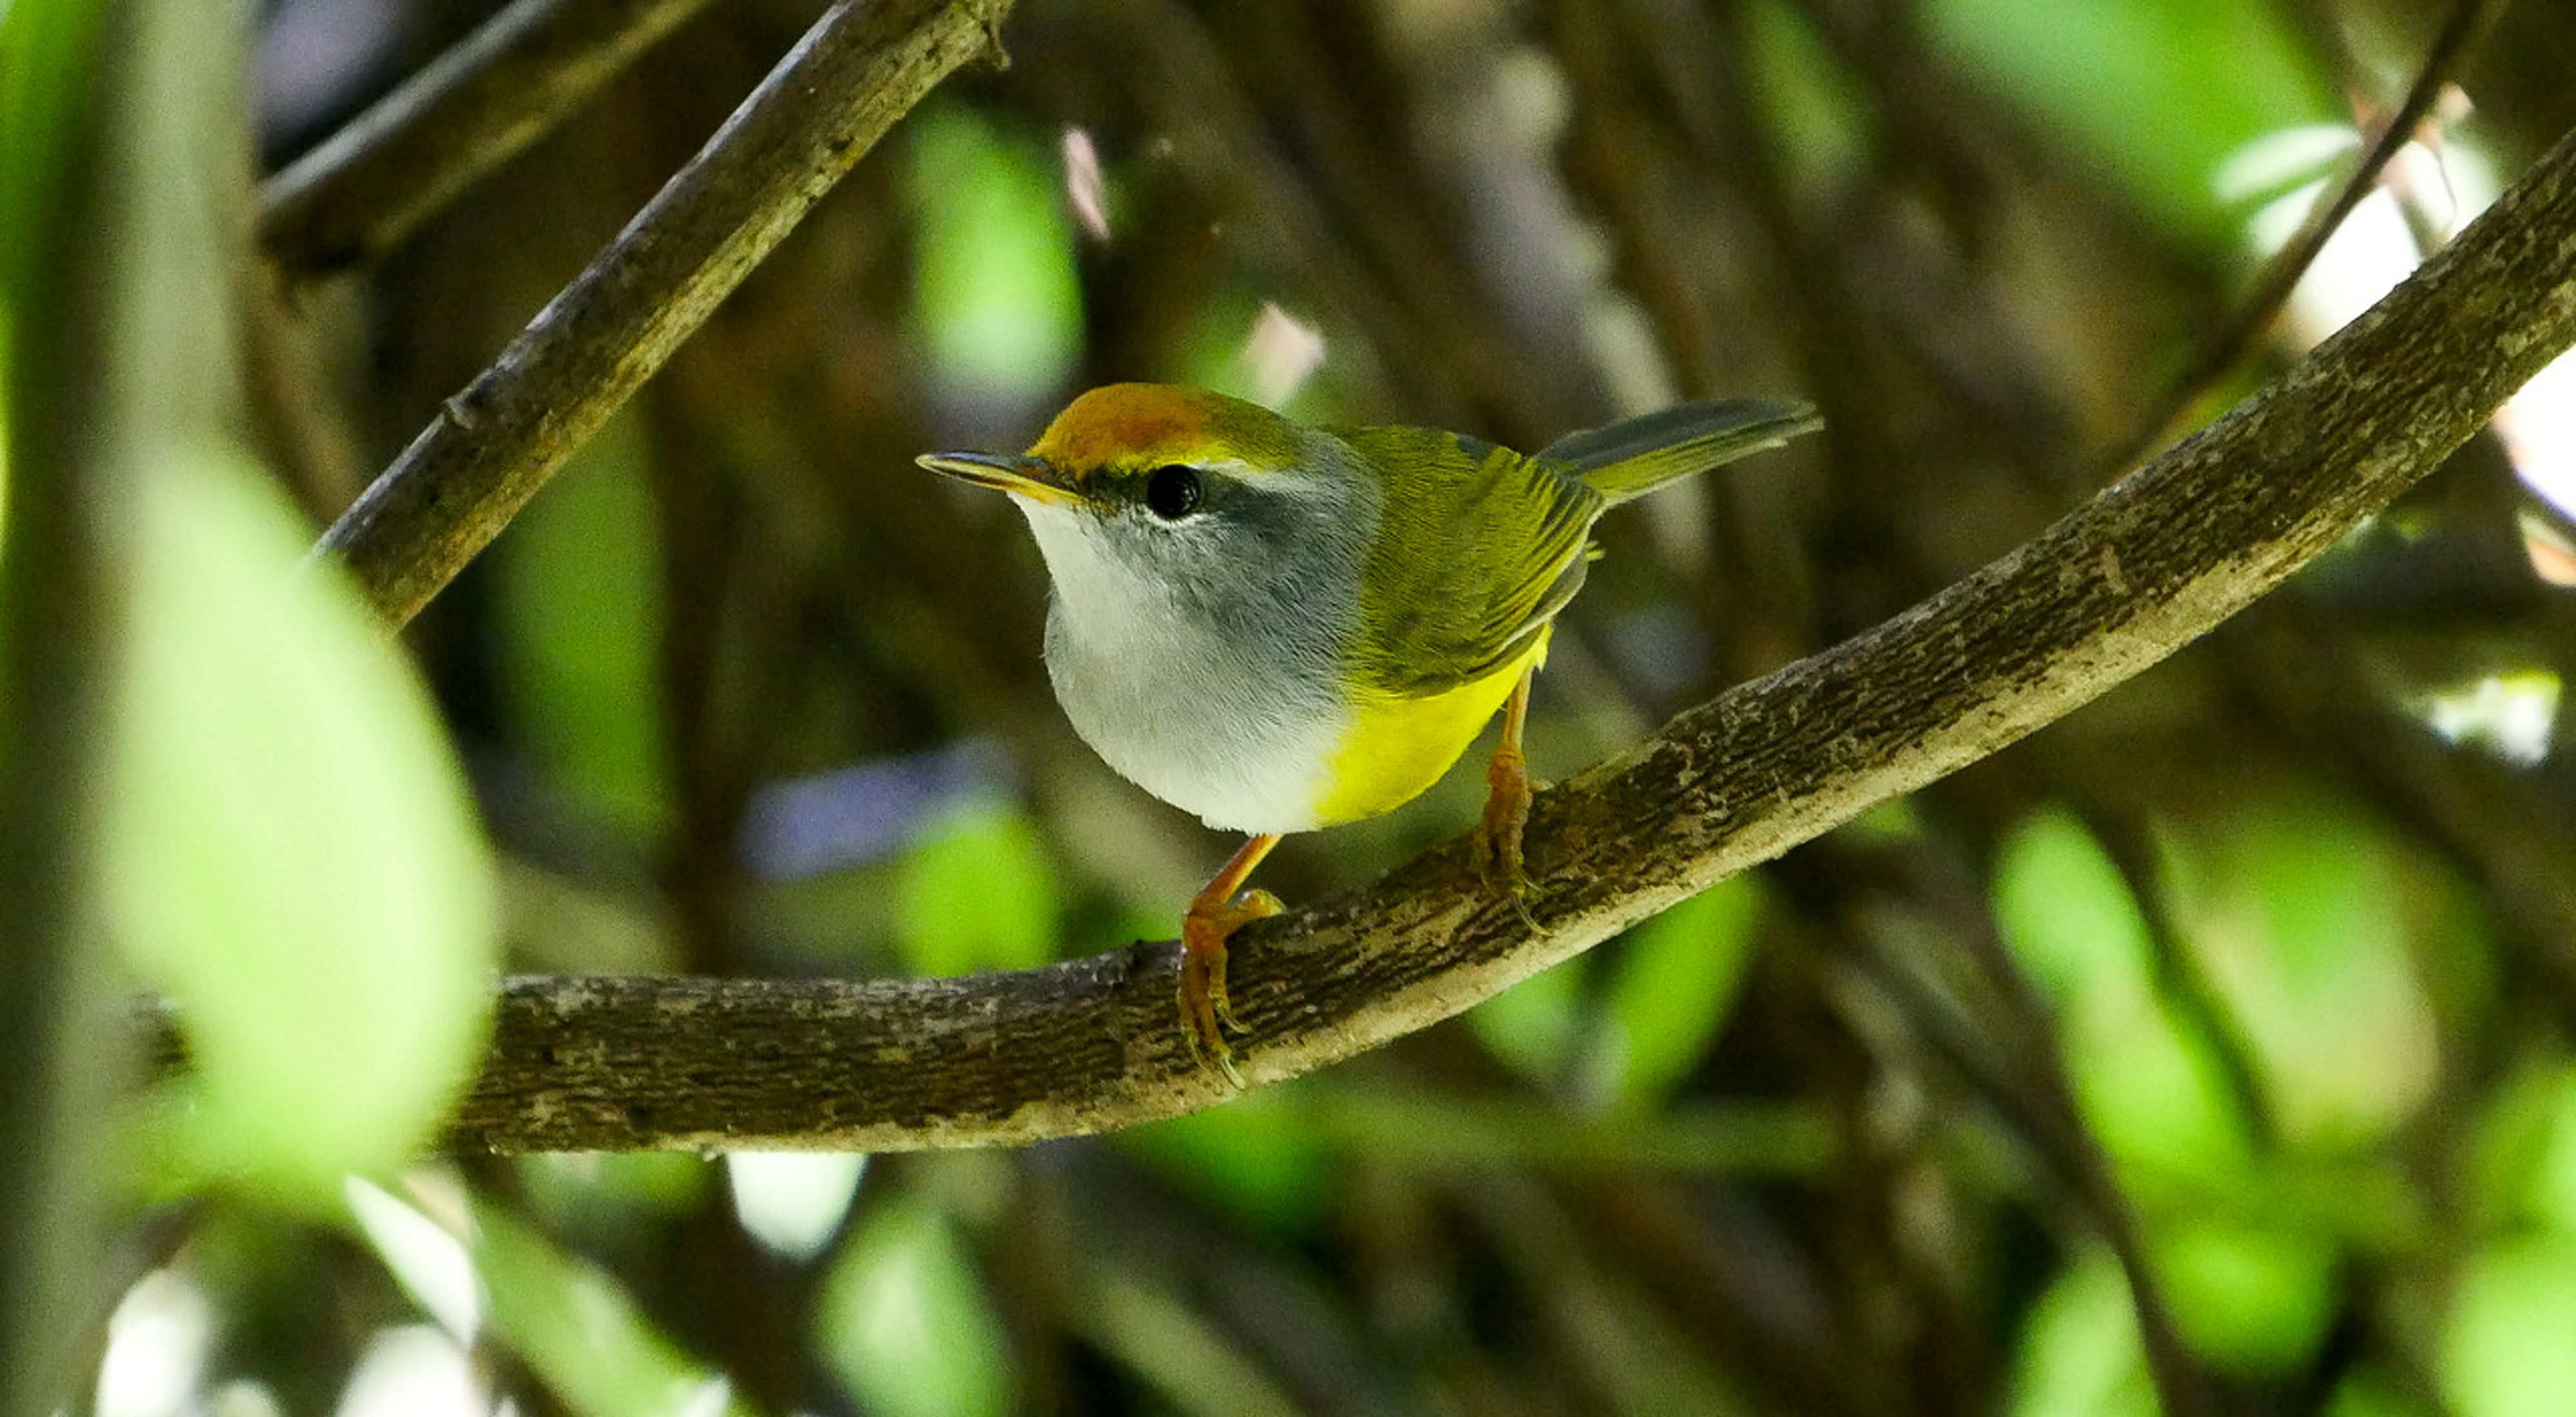 A yellow bird perches on a tree branch.